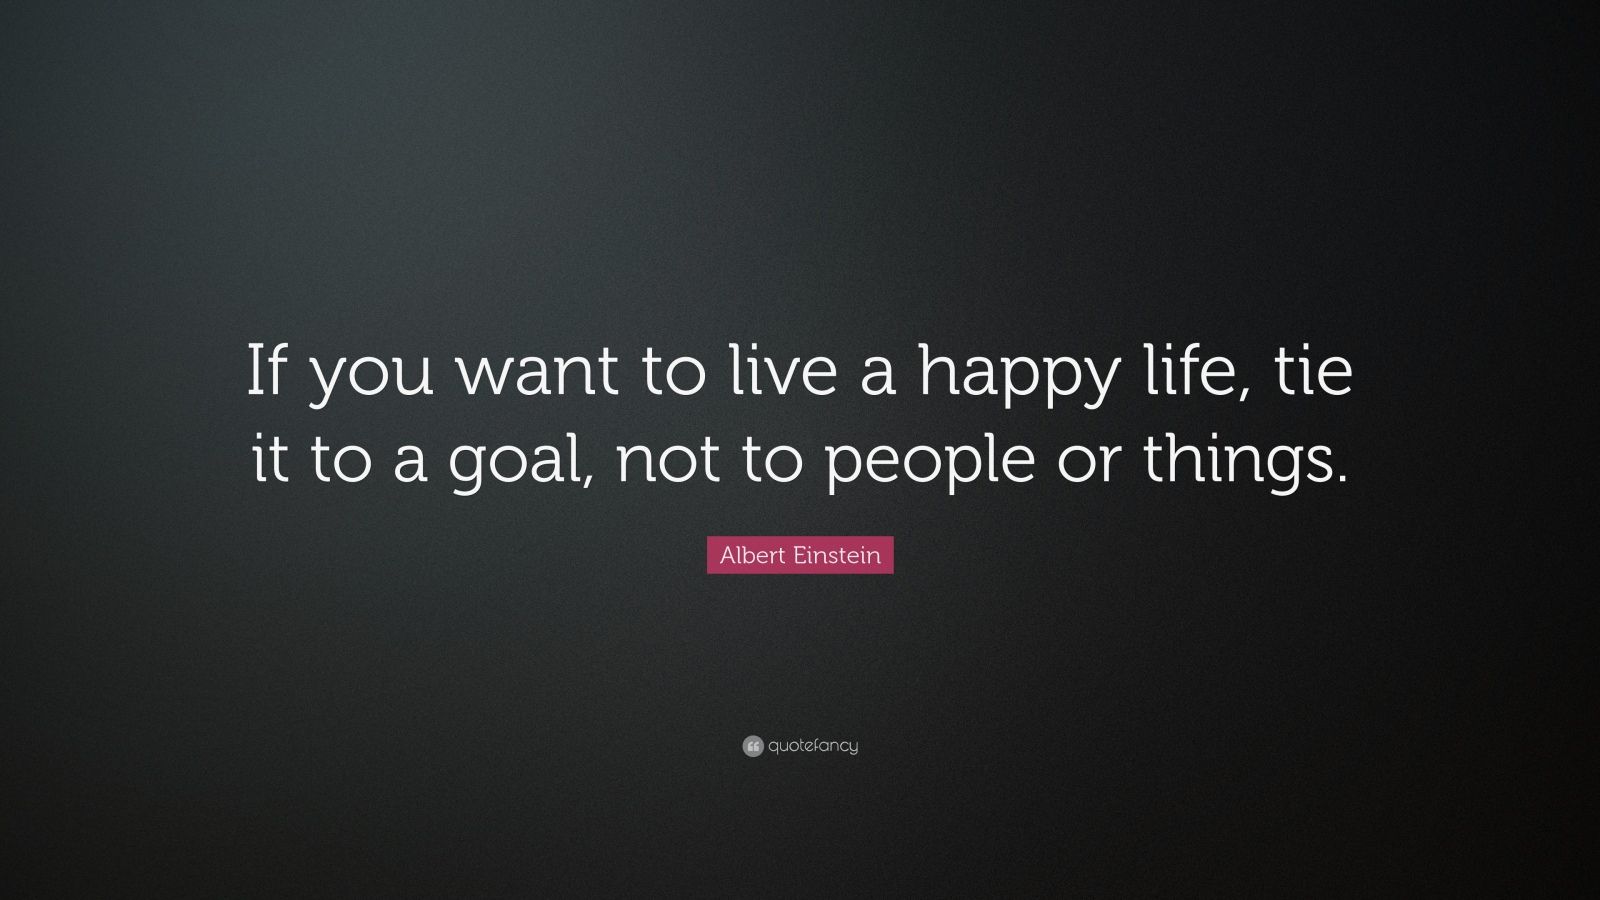 Albert Einstein Quote: “If you want to live a happy life, tie it to a ...